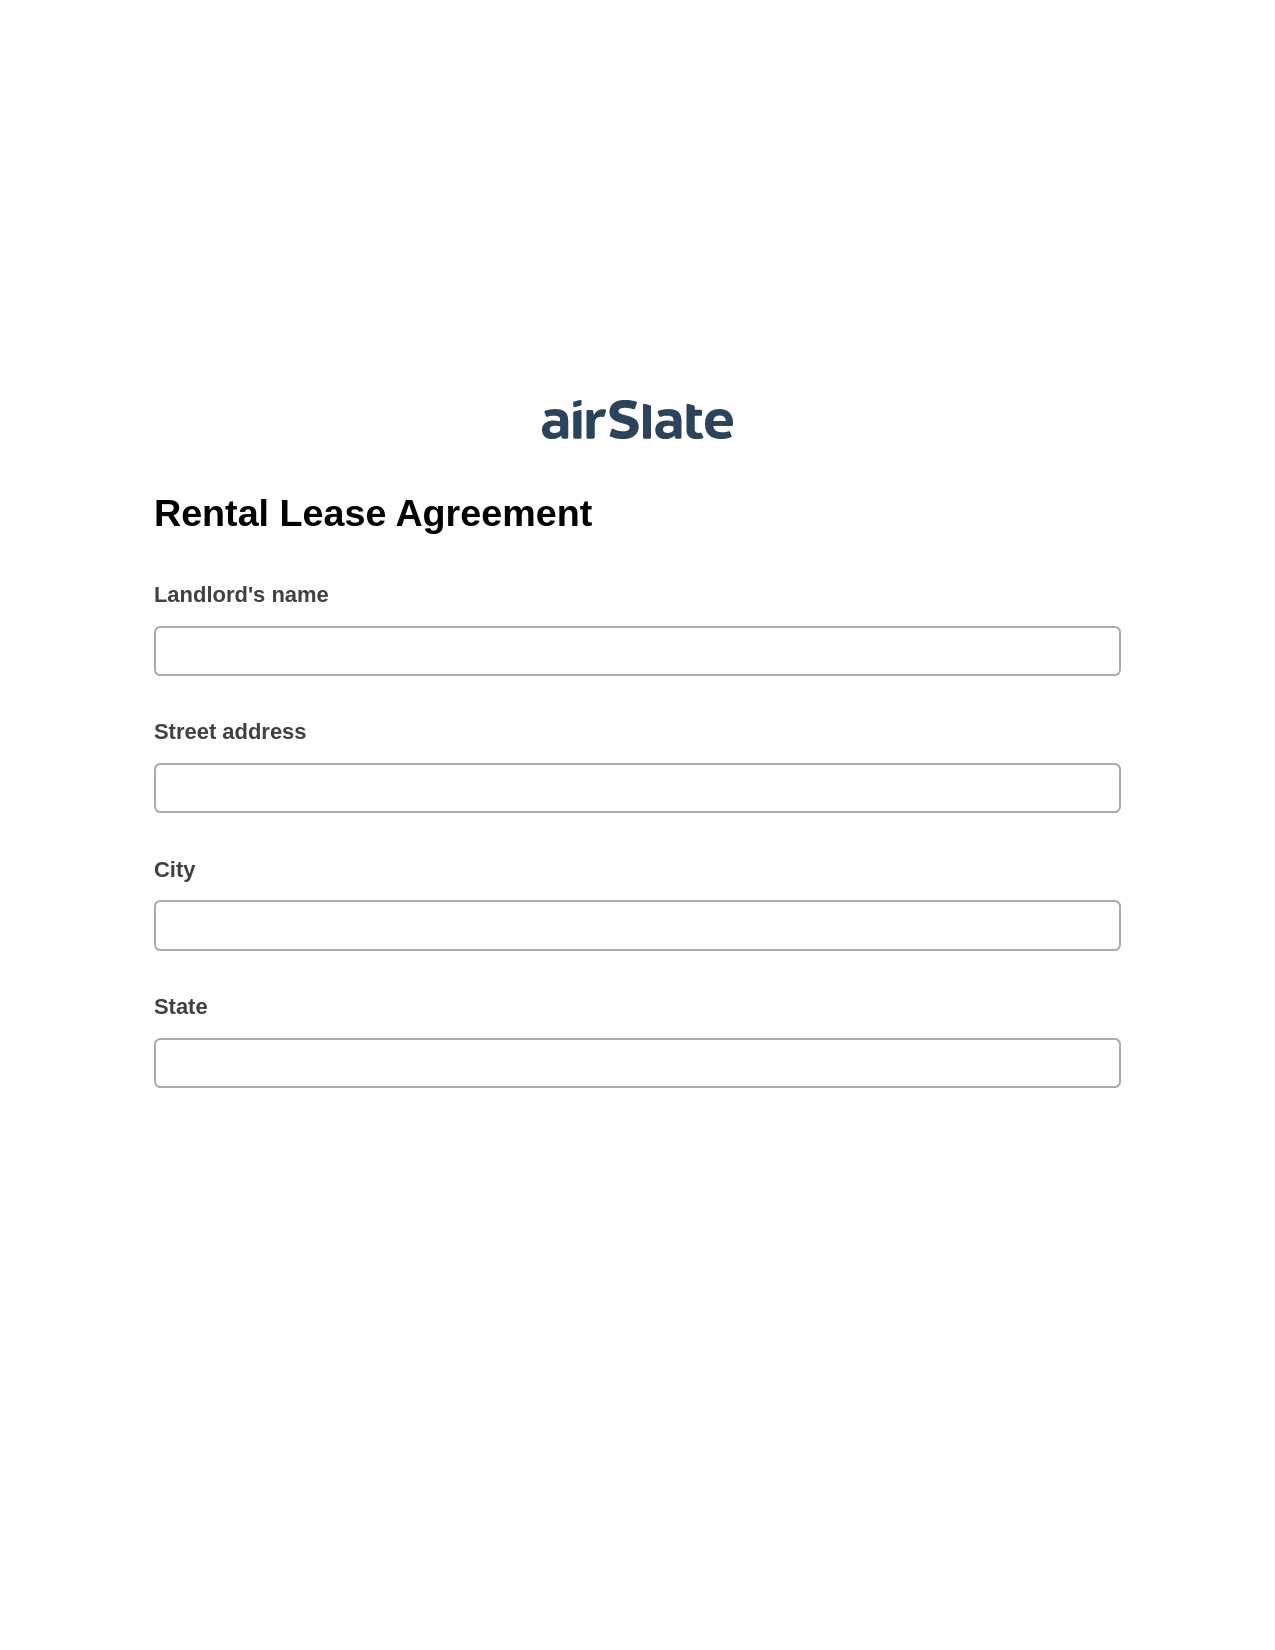 Rental Lease Agreement Pre-fill Slate from MS Dynamics 365 Records Bot, Google Cloud Print Bot, Email Notification Postfinish Bot